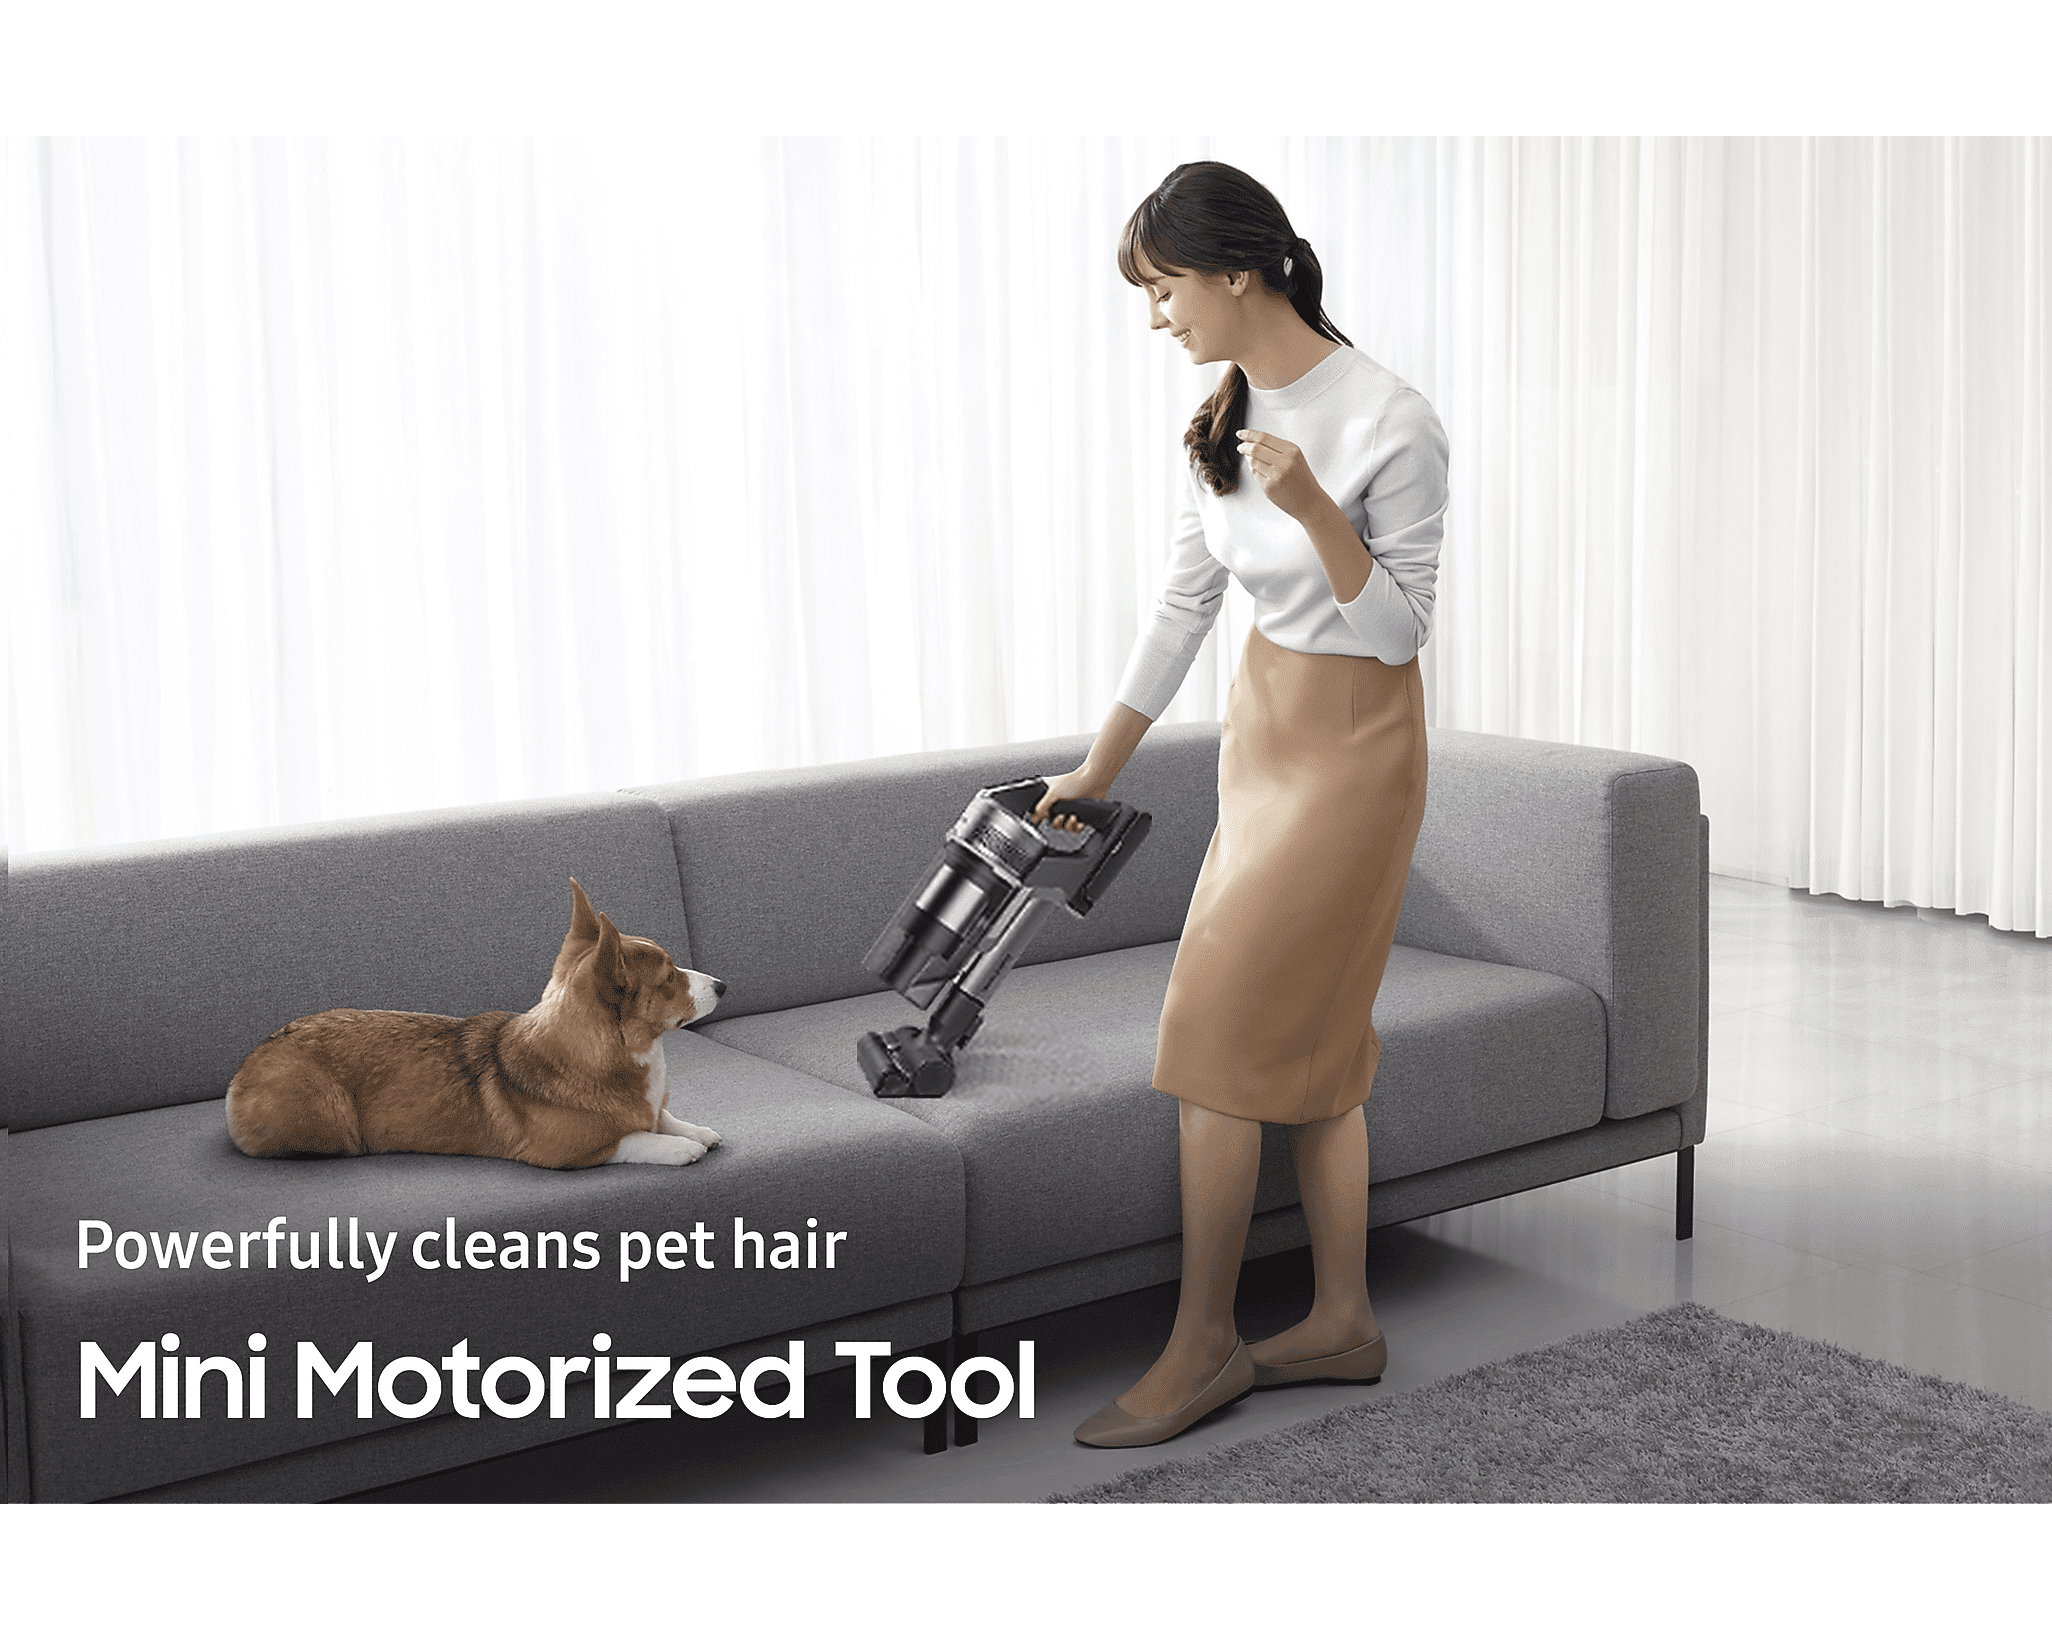 powerful and modern vacuum cleaners - best residential vacuum cleaners